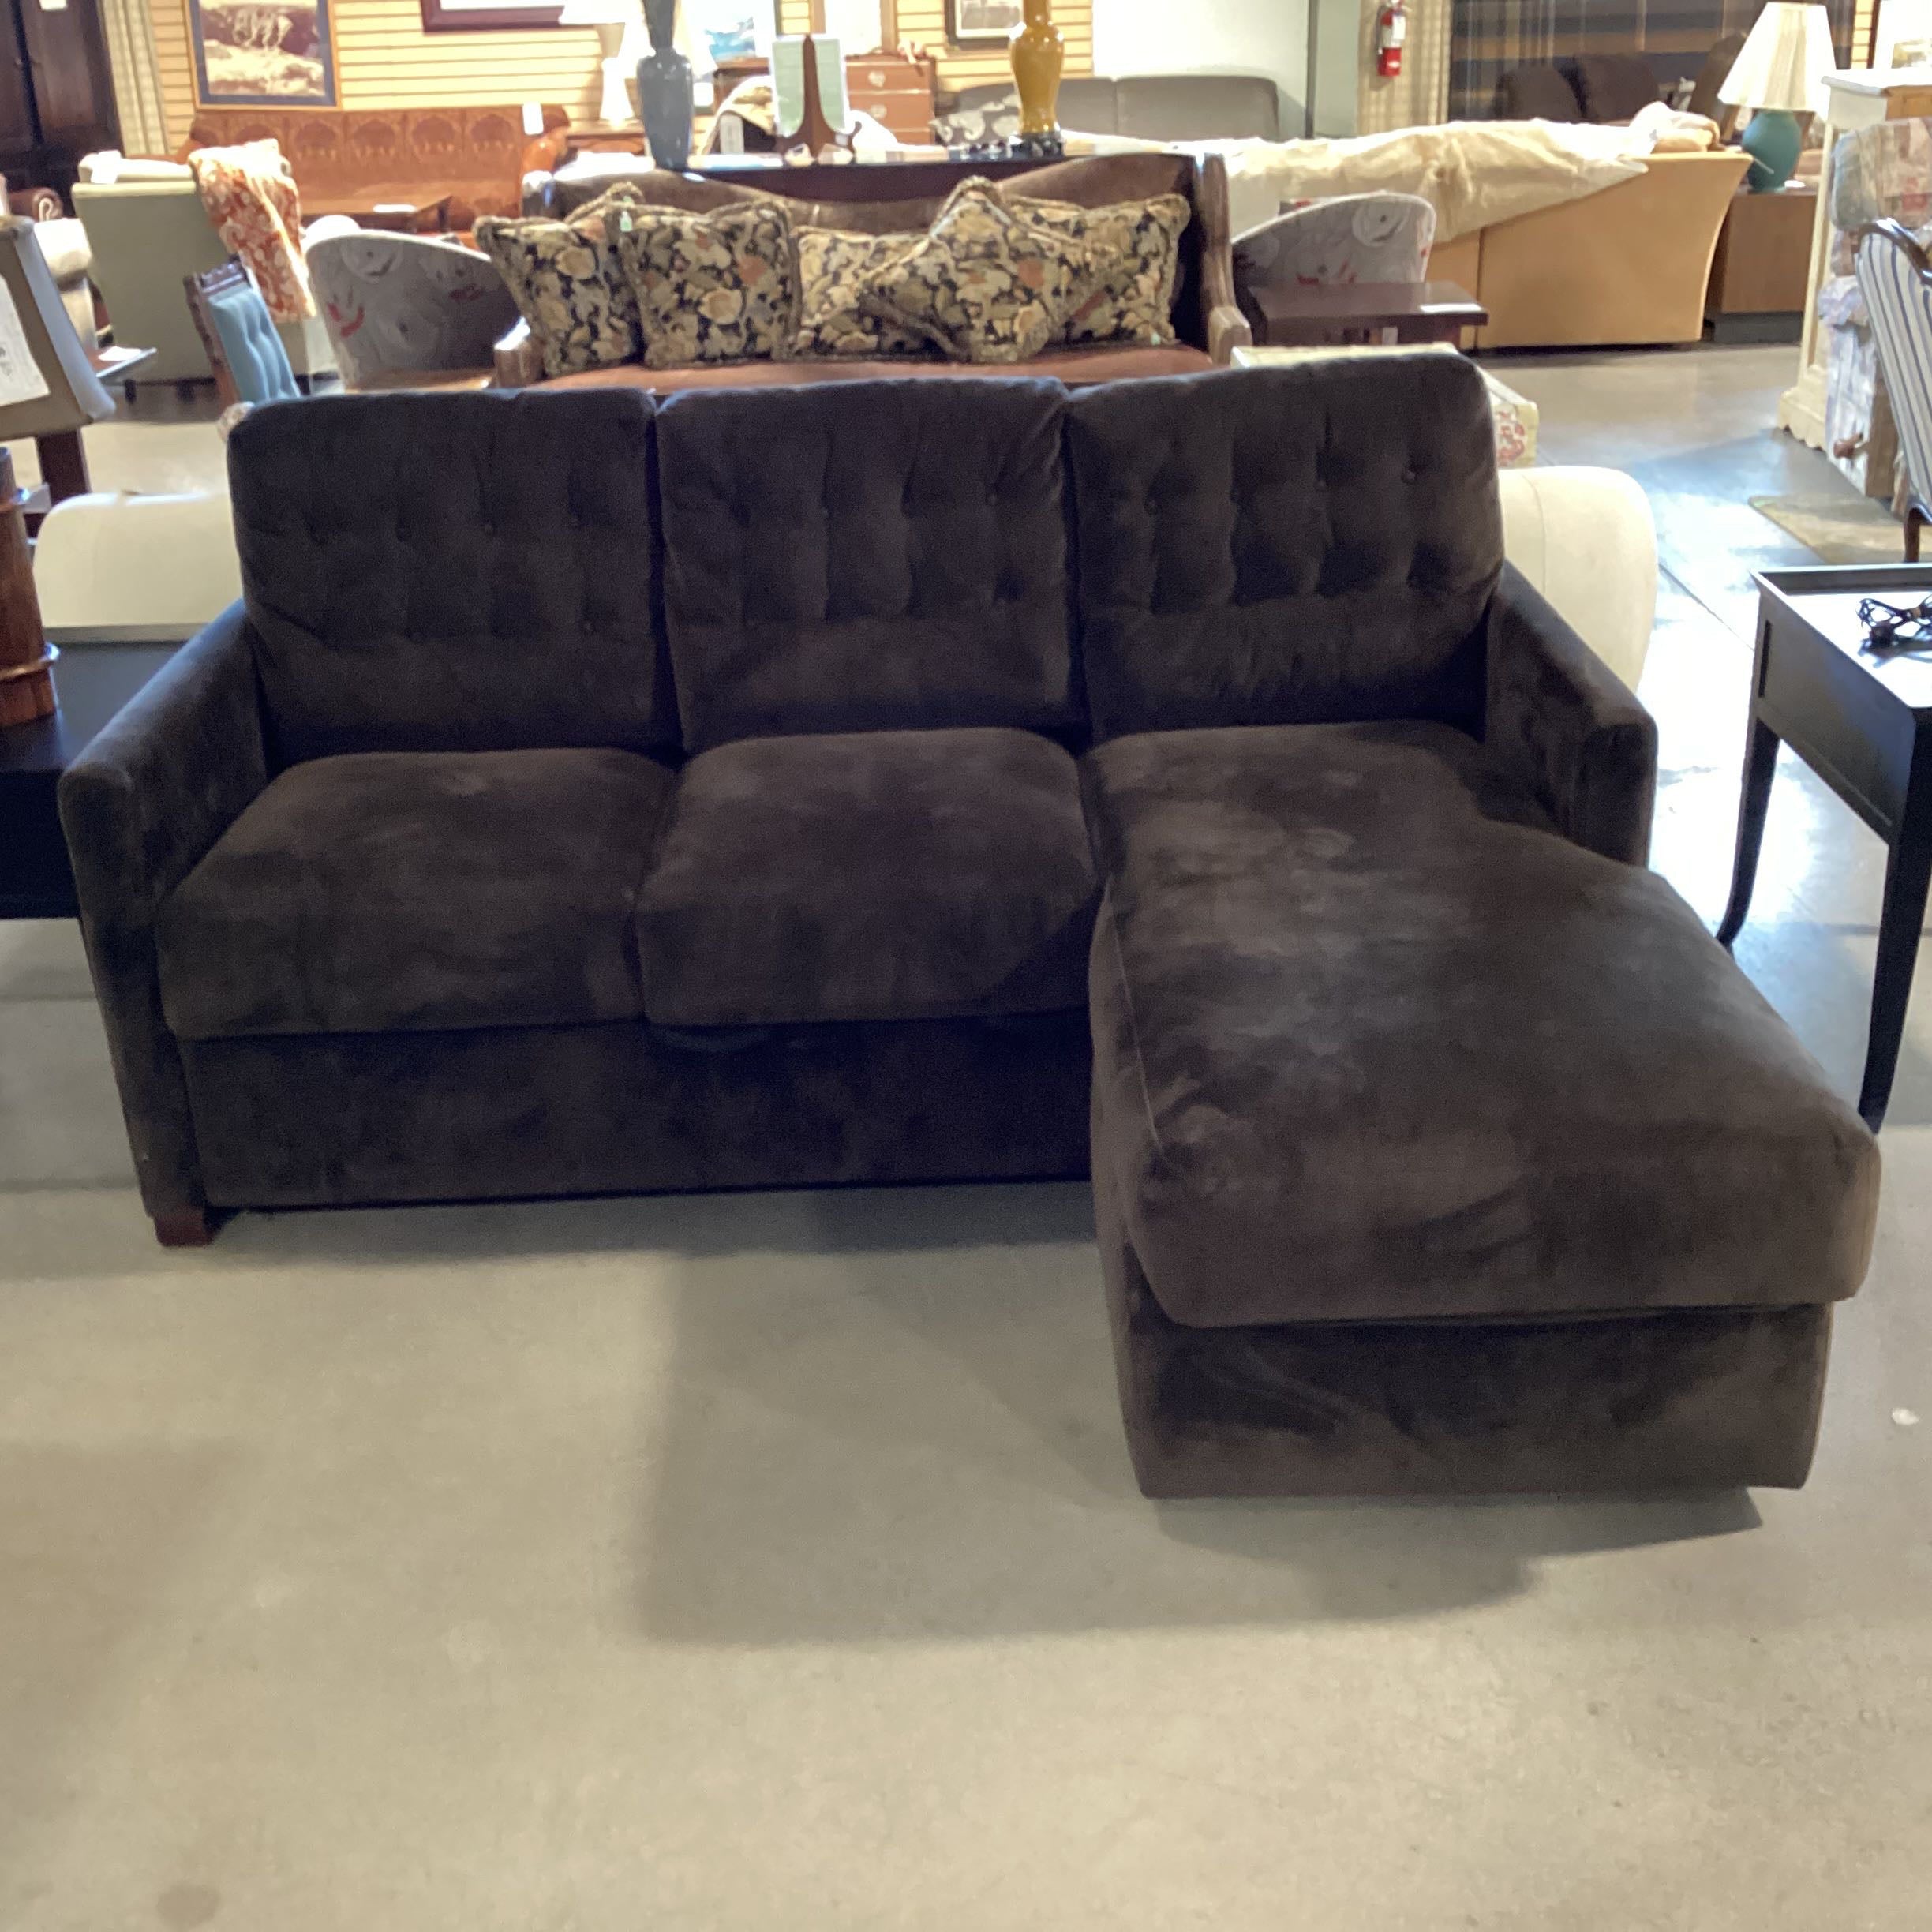 American Leather Comfort Sleeper Queen Brown Velvet with Chaise Sectional